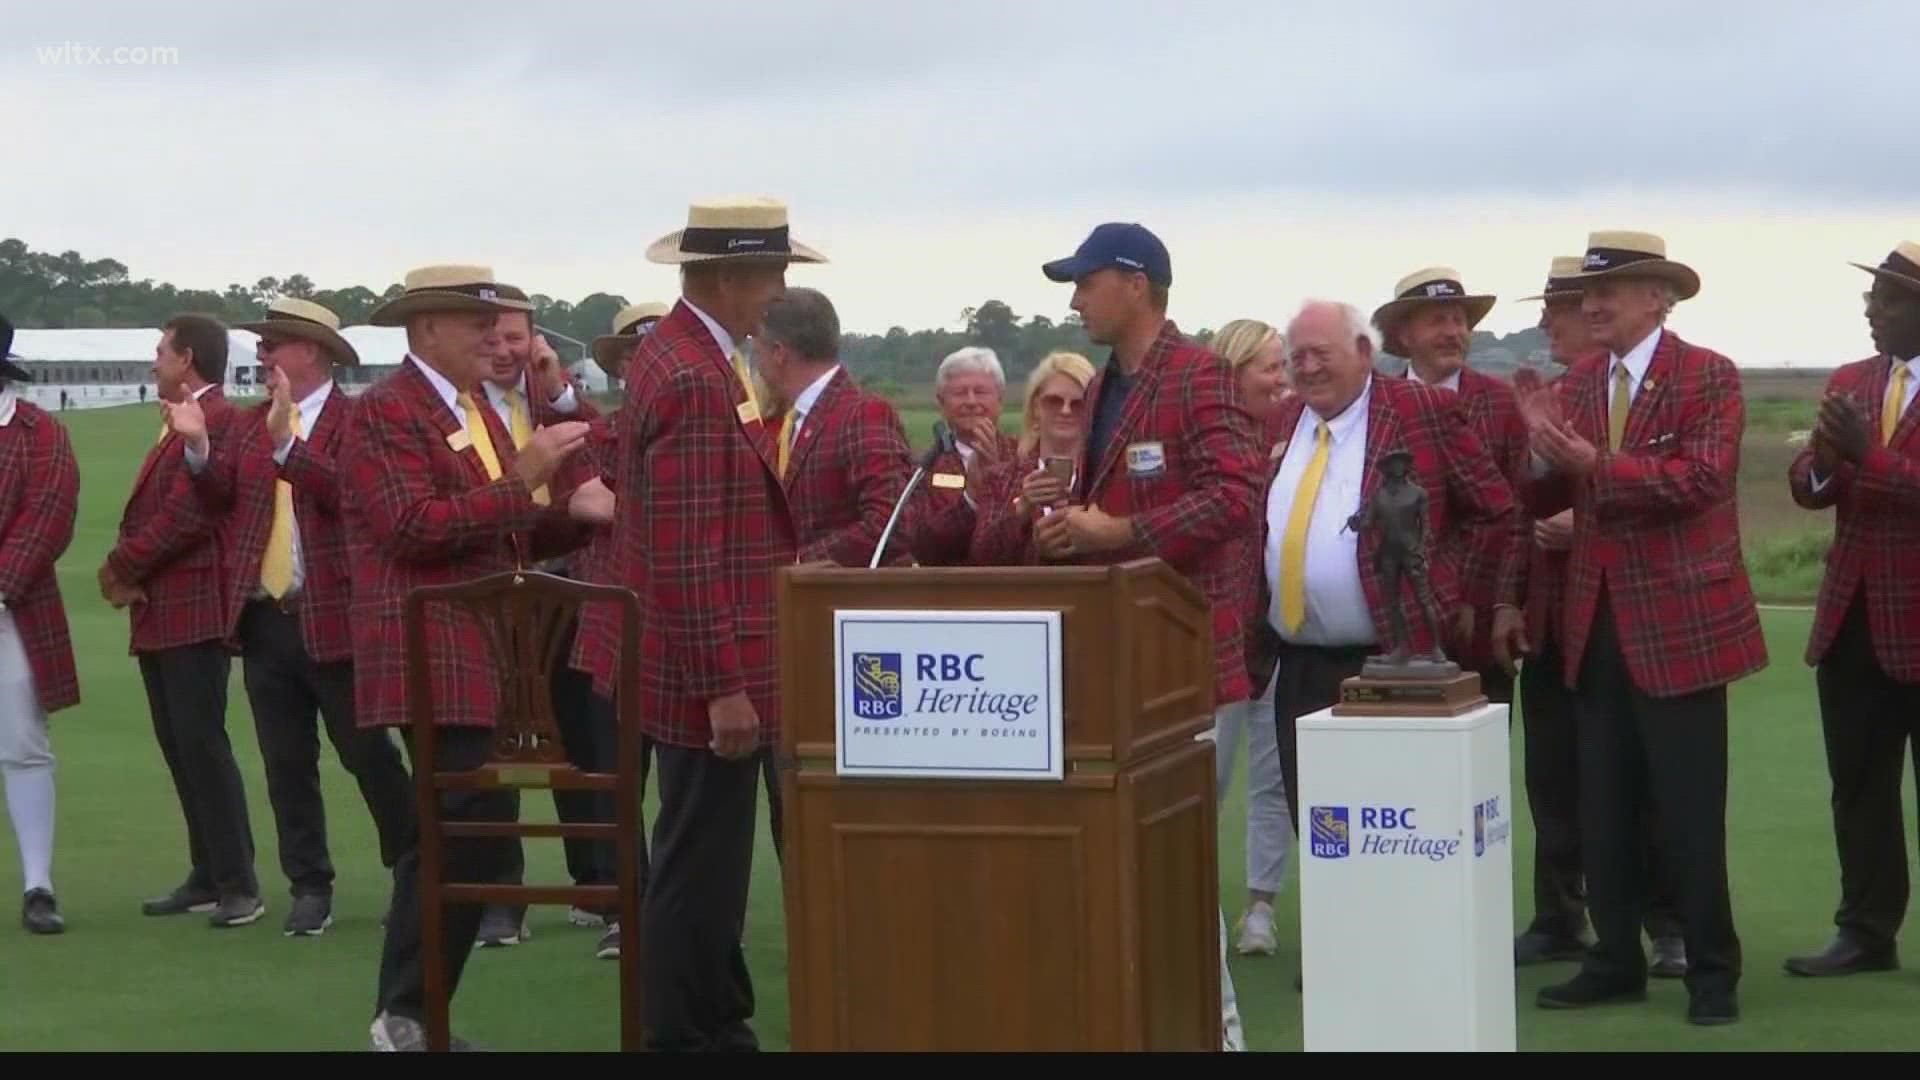 The RBC Heritage moves up to elevated status wltx